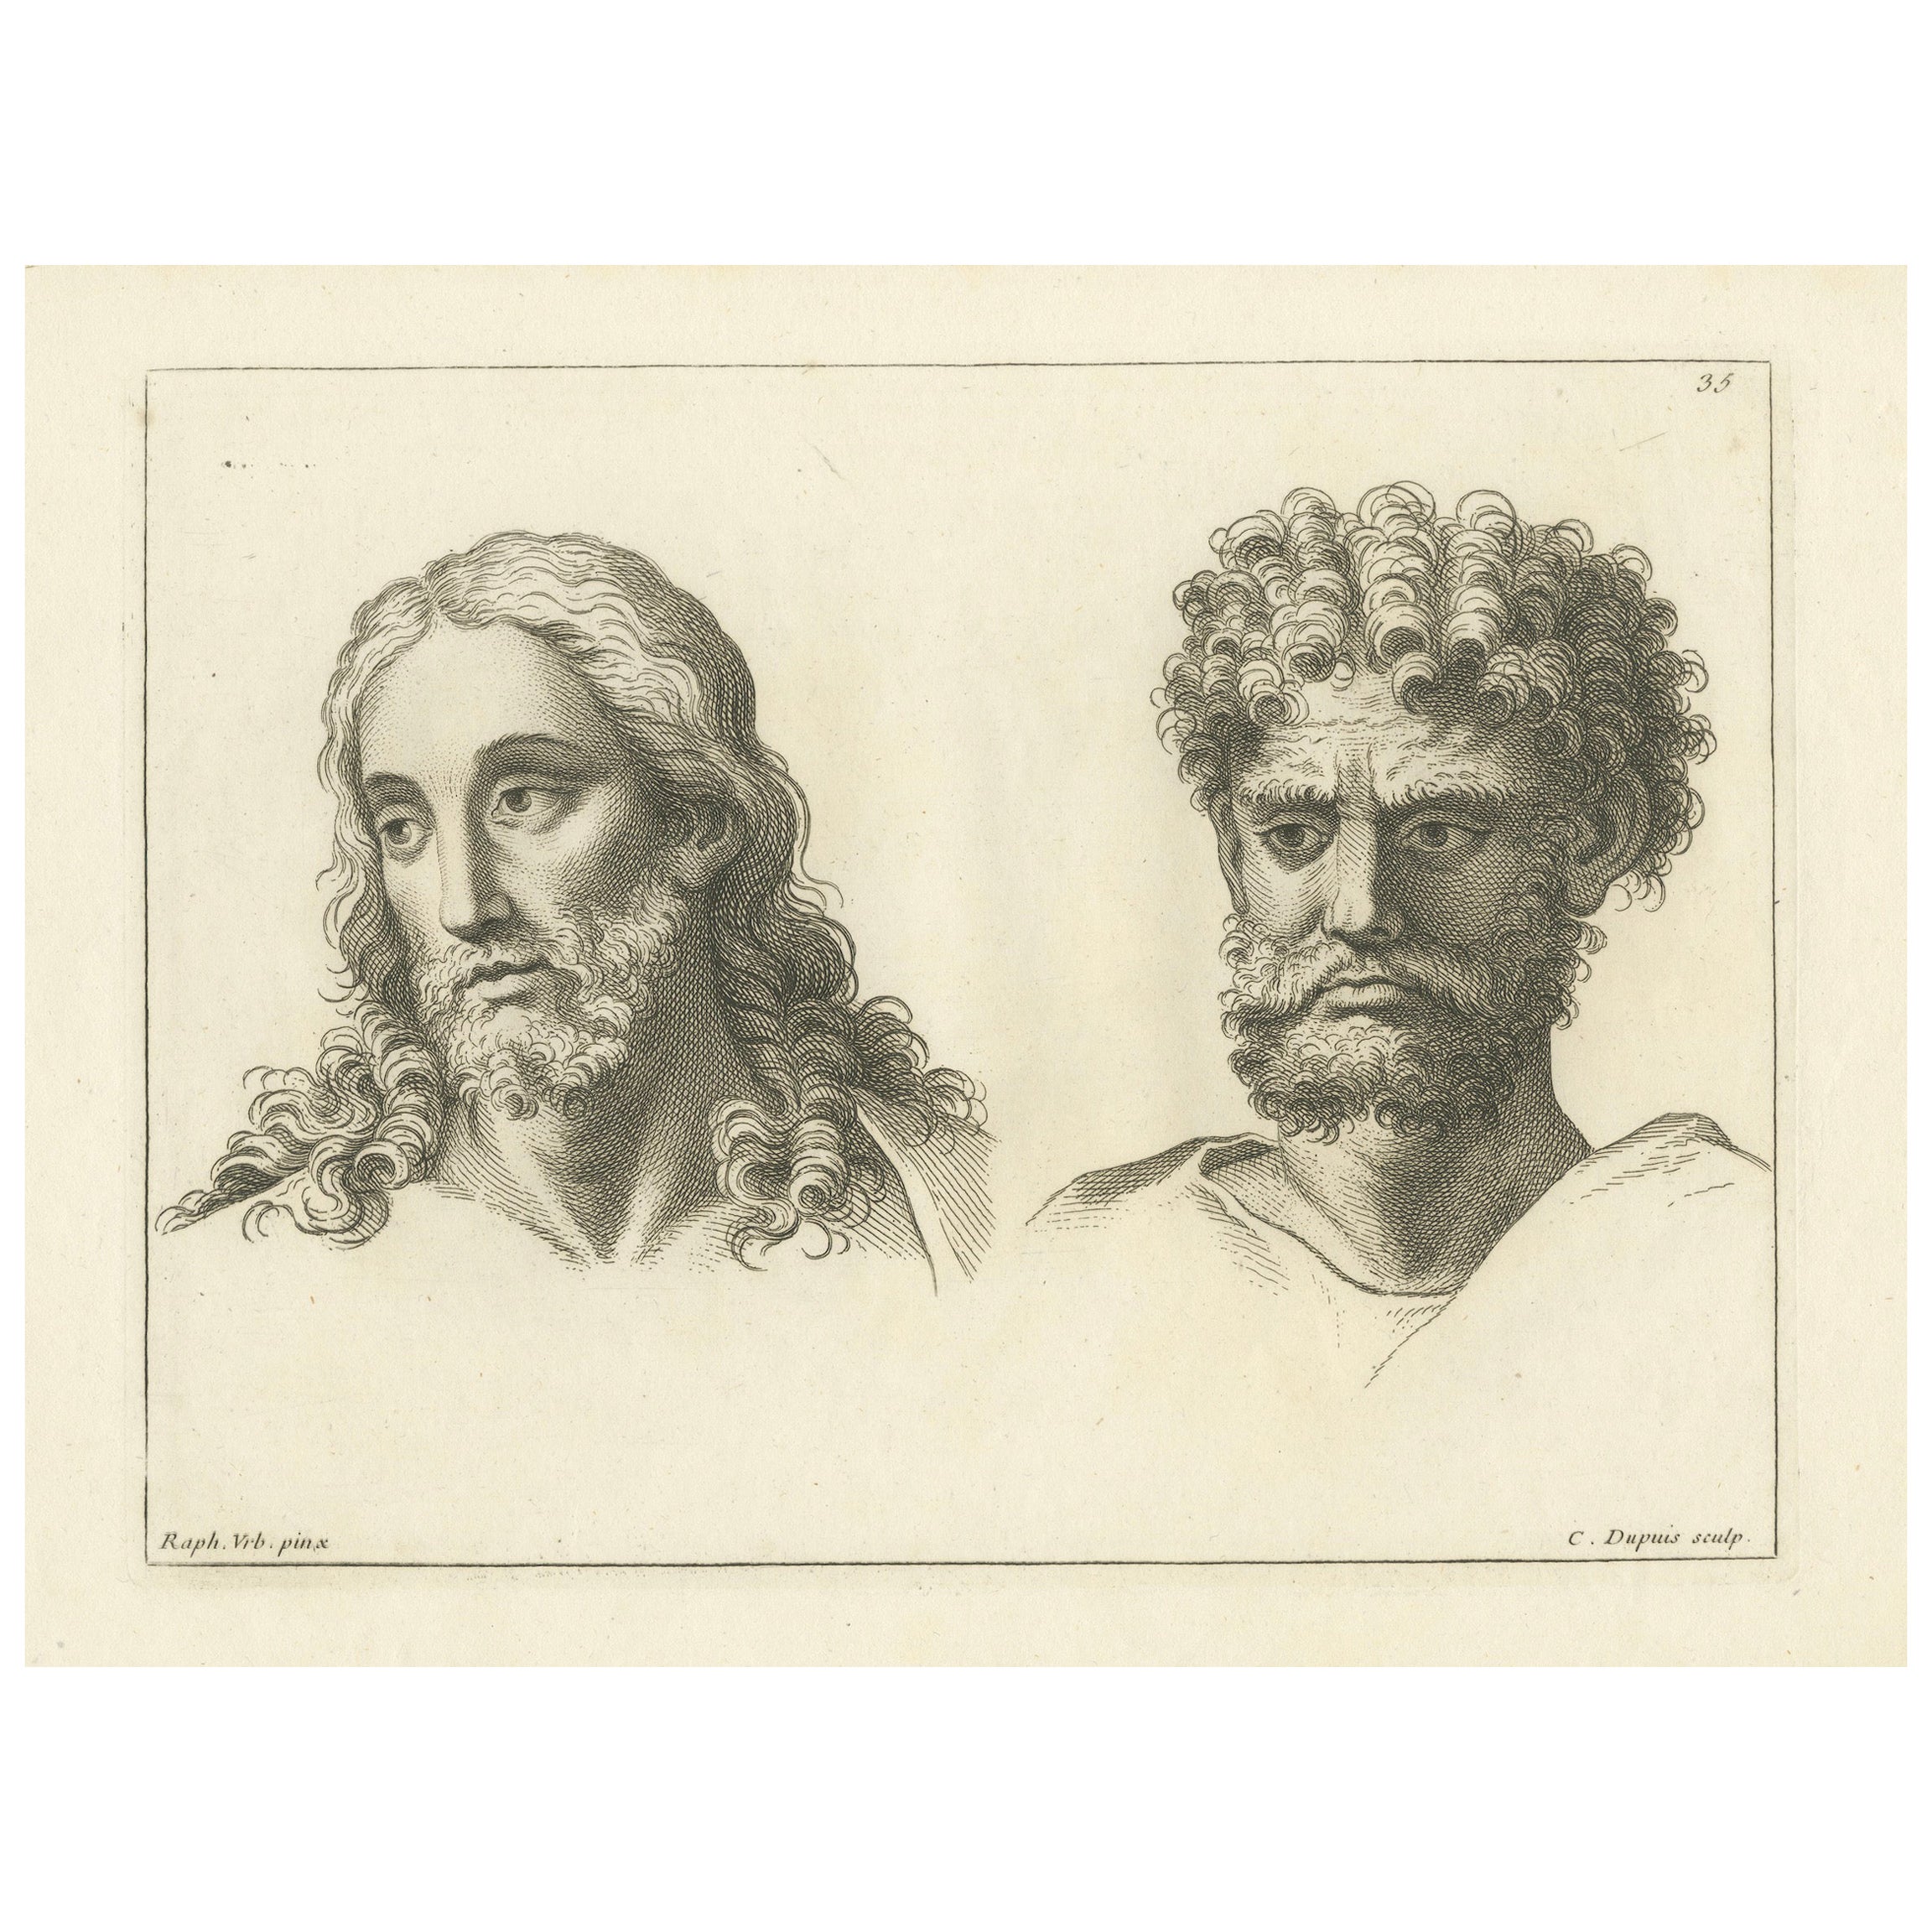 Serene and Stern: Dualities of Raphael by C. Dupuis, 1740 For Sale